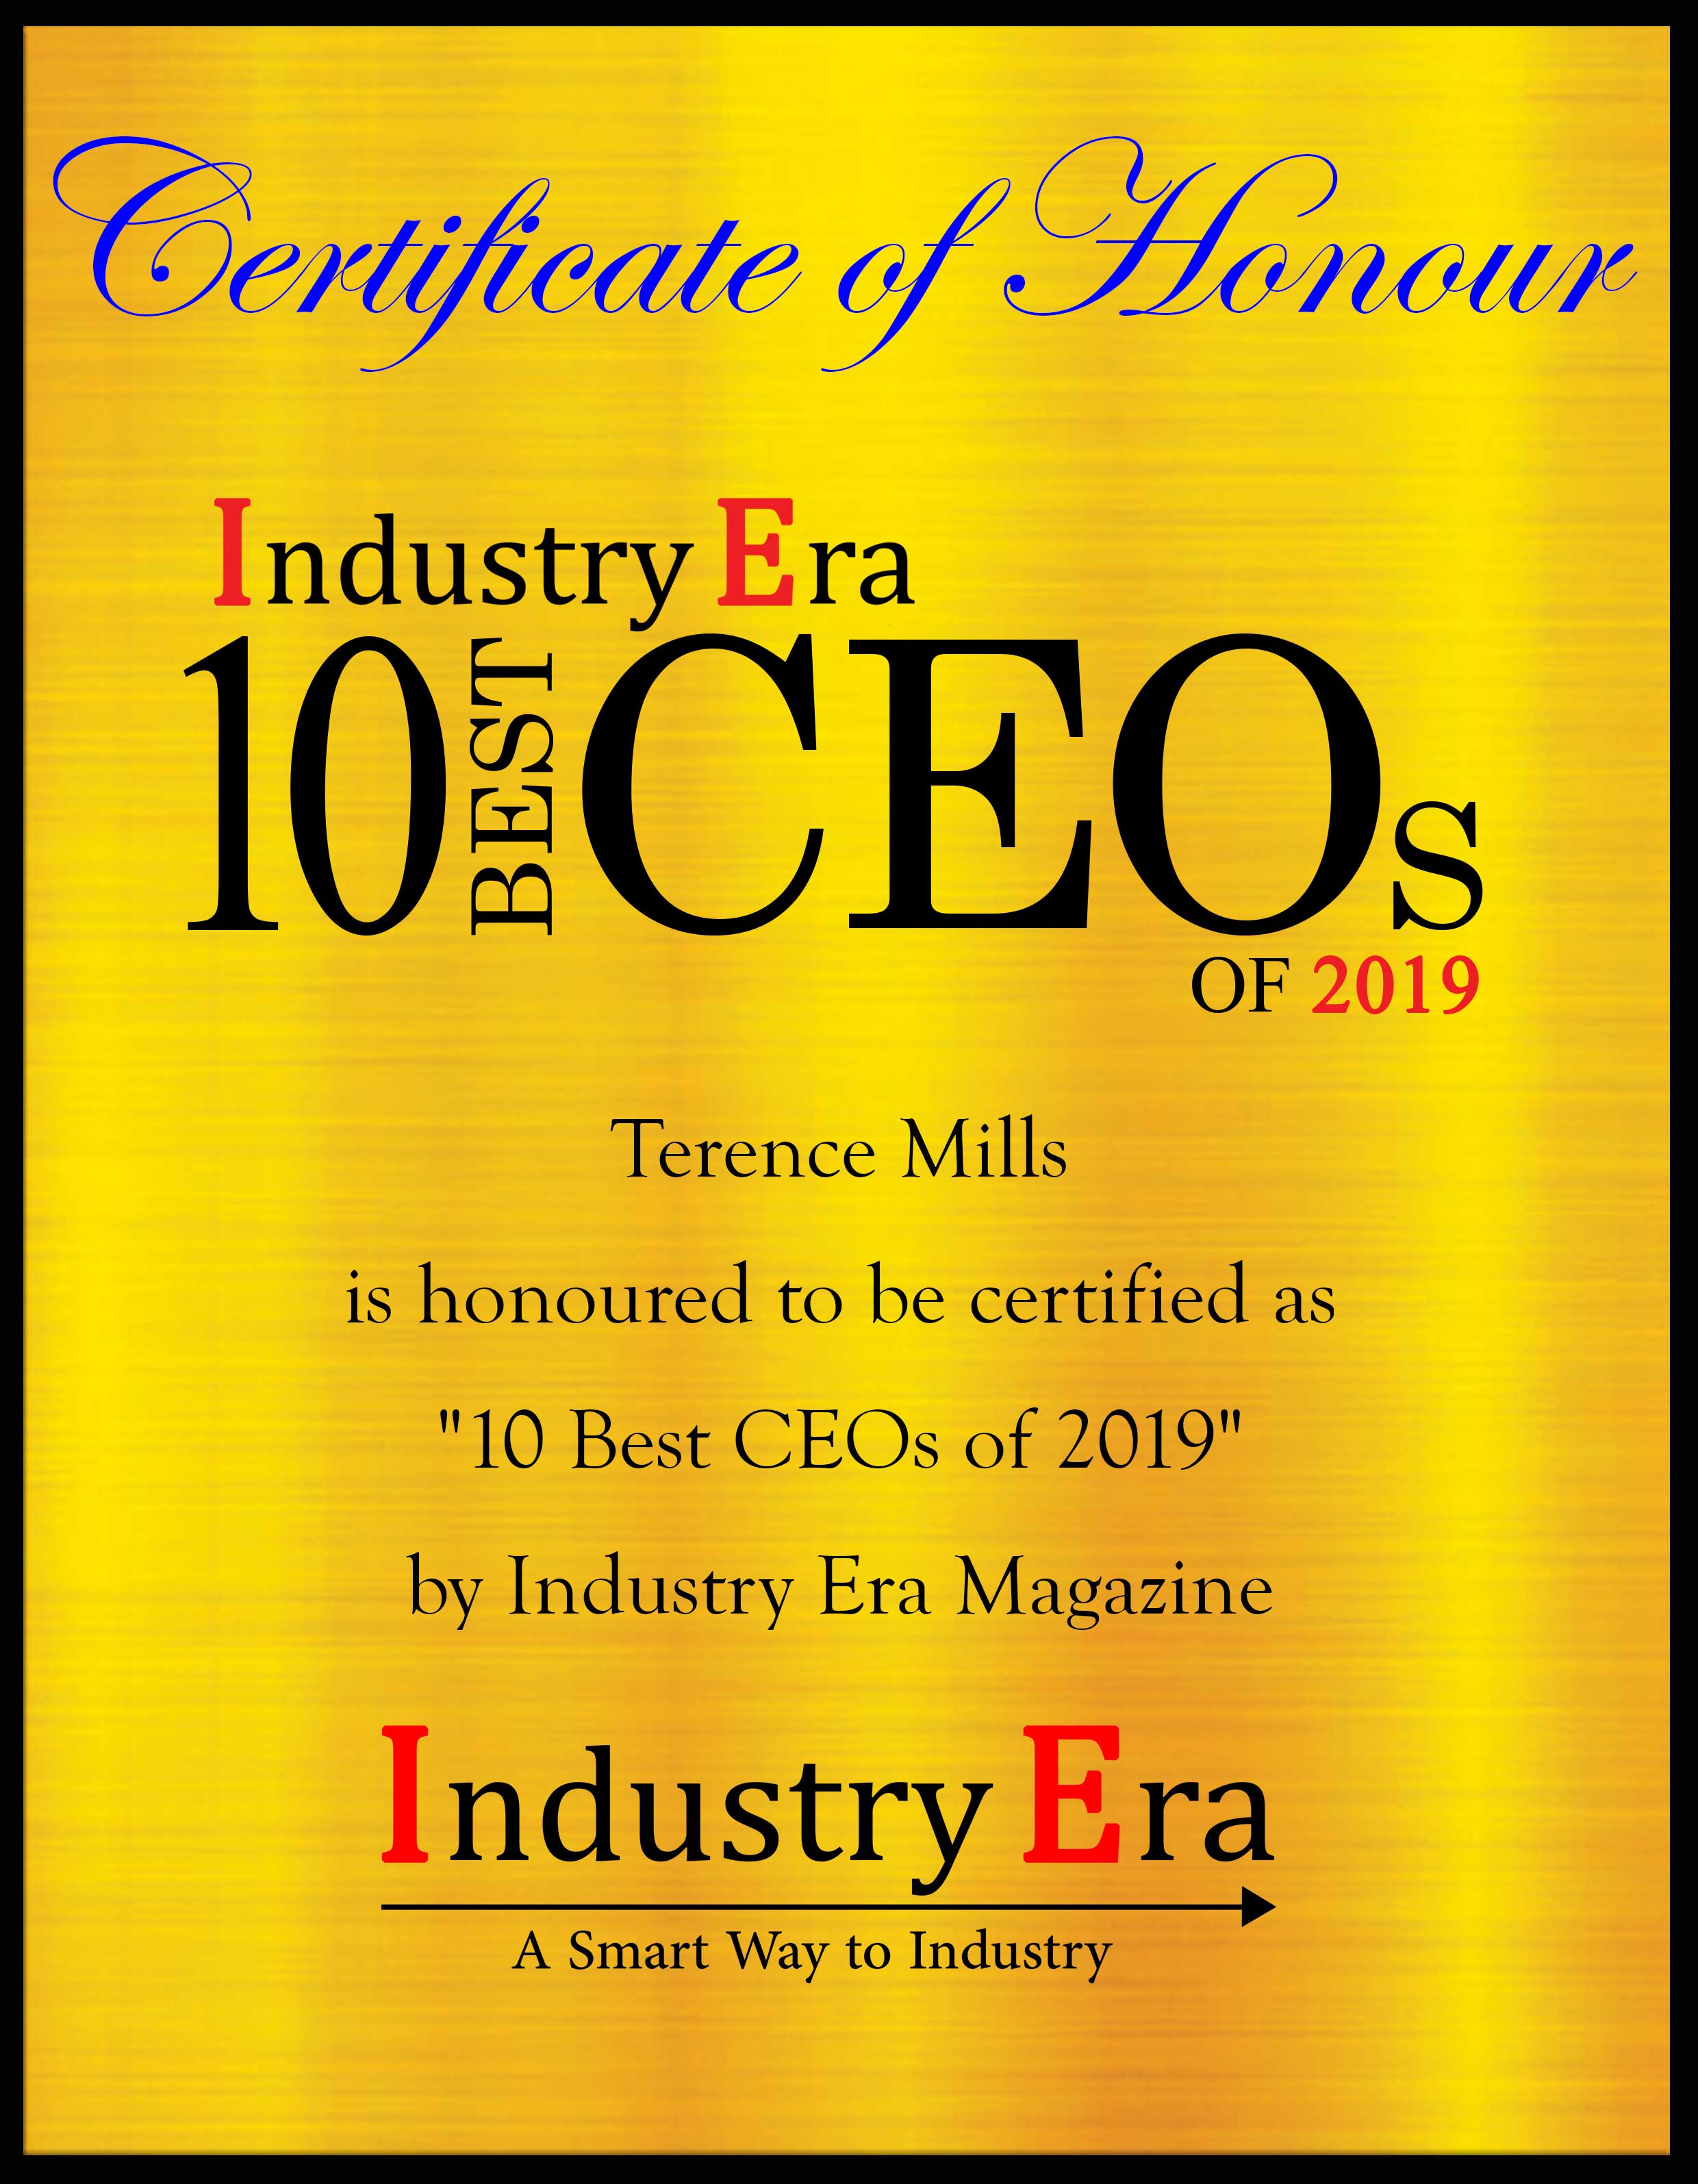 Terence Mills CEO & Chairman AI.io, Best CEOs of 2019 Certificate